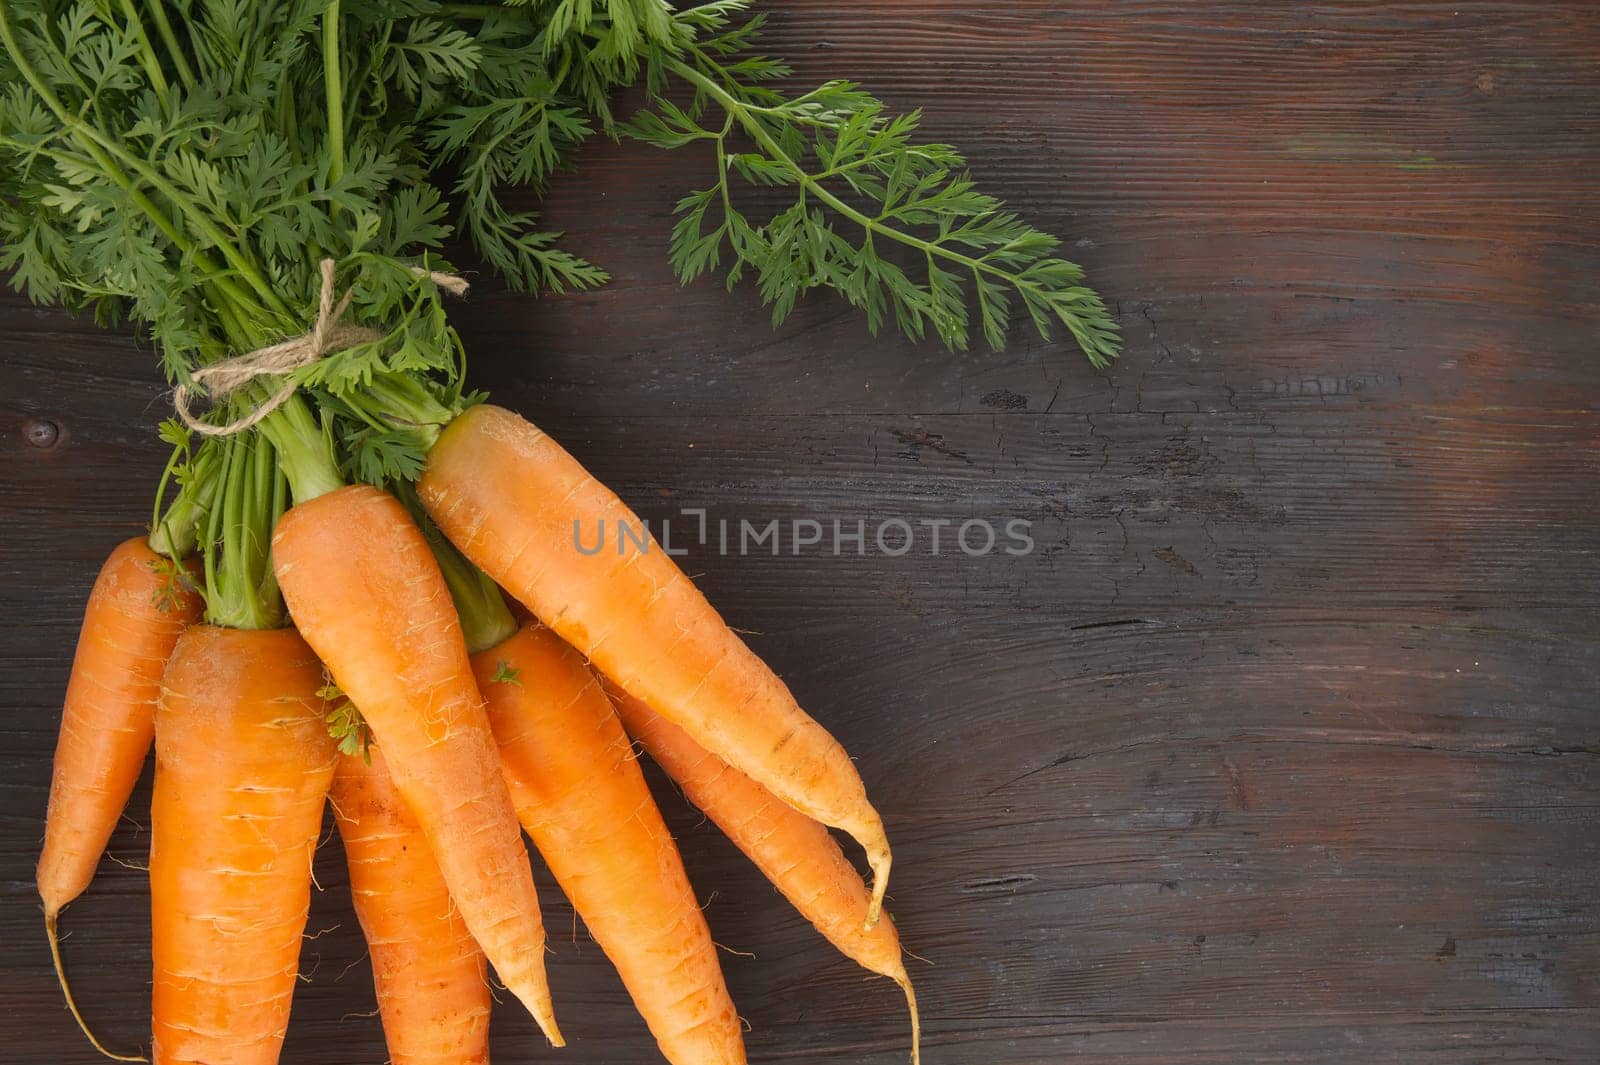 Bundle of vibrant orange carrots with green leafy tops is neatly tied together using twine and positioned on an old, rustic wooden table